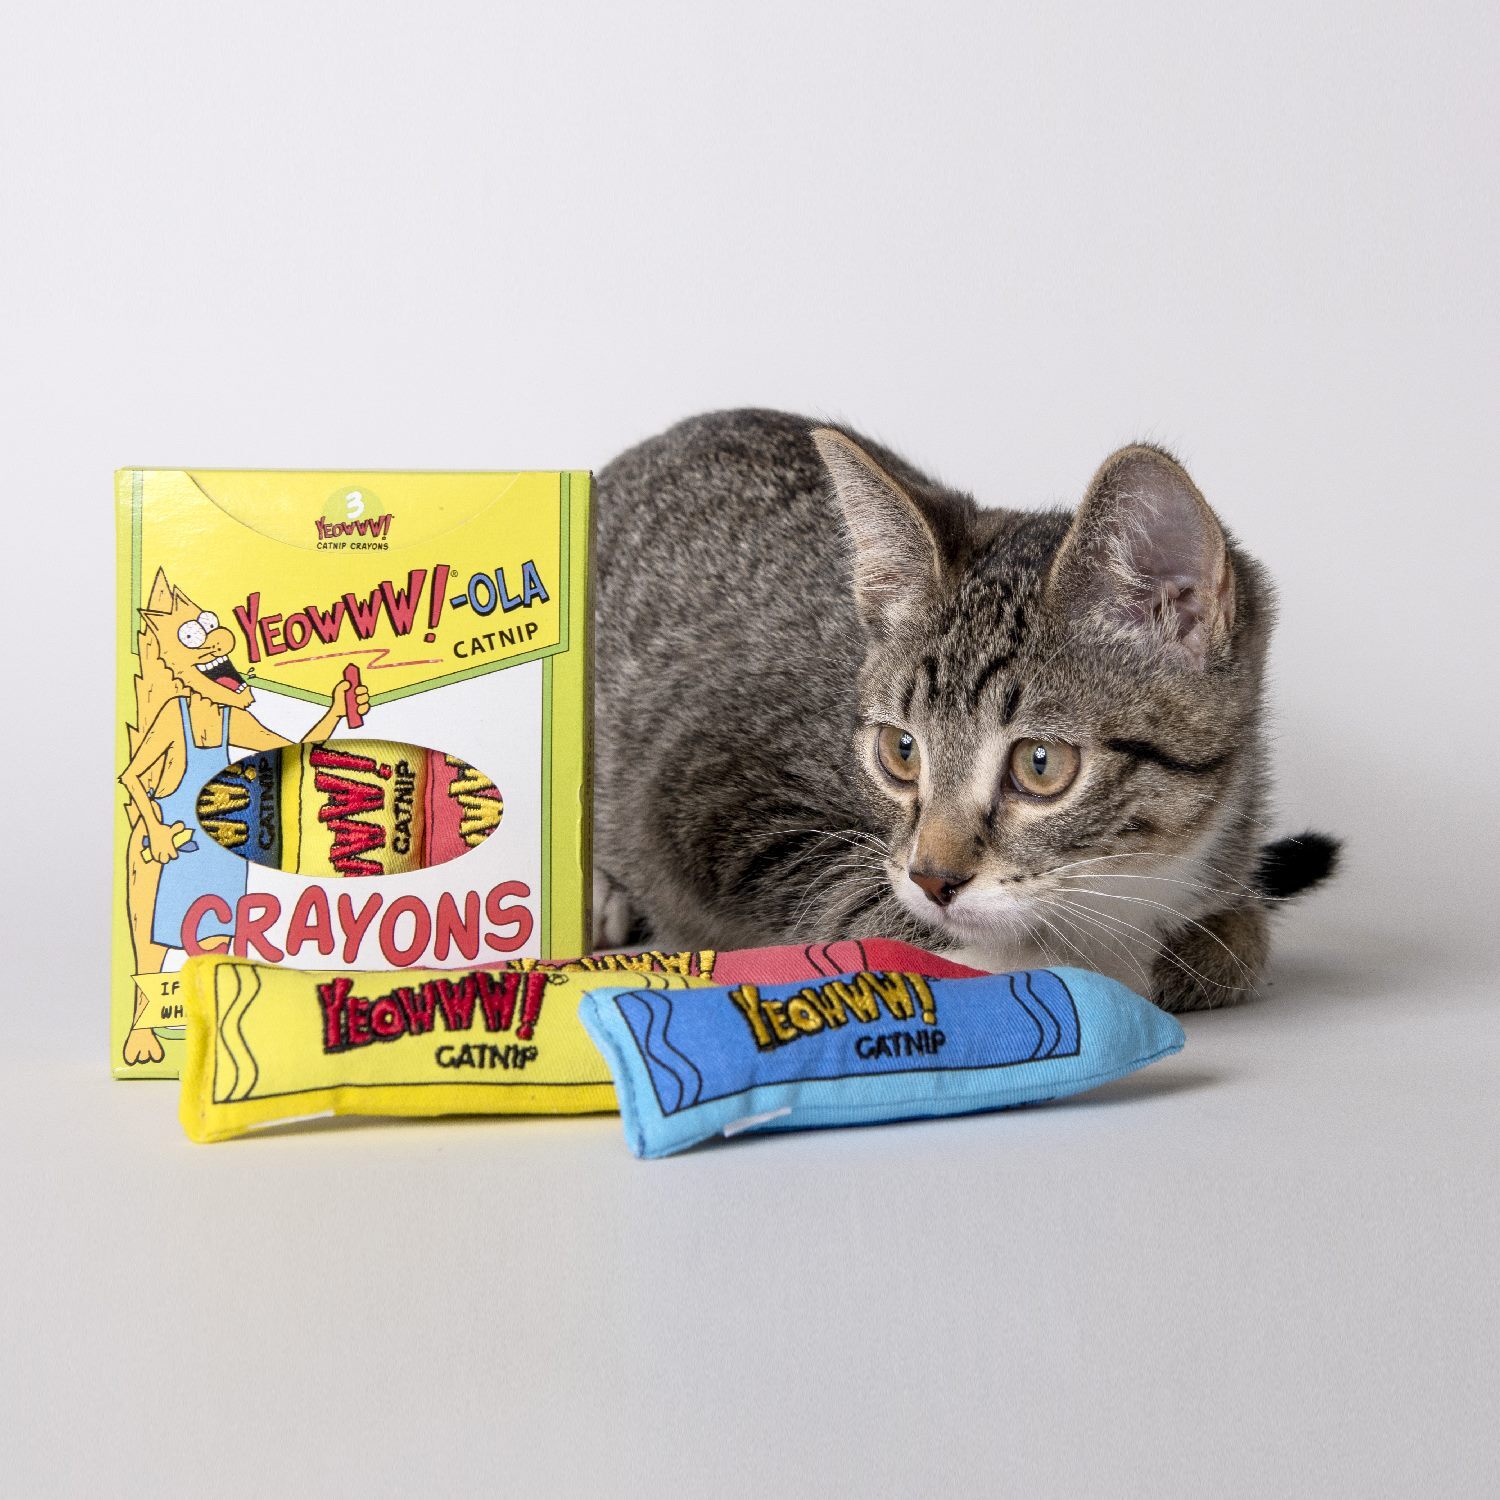 Yeowww! Cat Toys with Pure American Catnip - Yeowww!-ola Crayon image 5